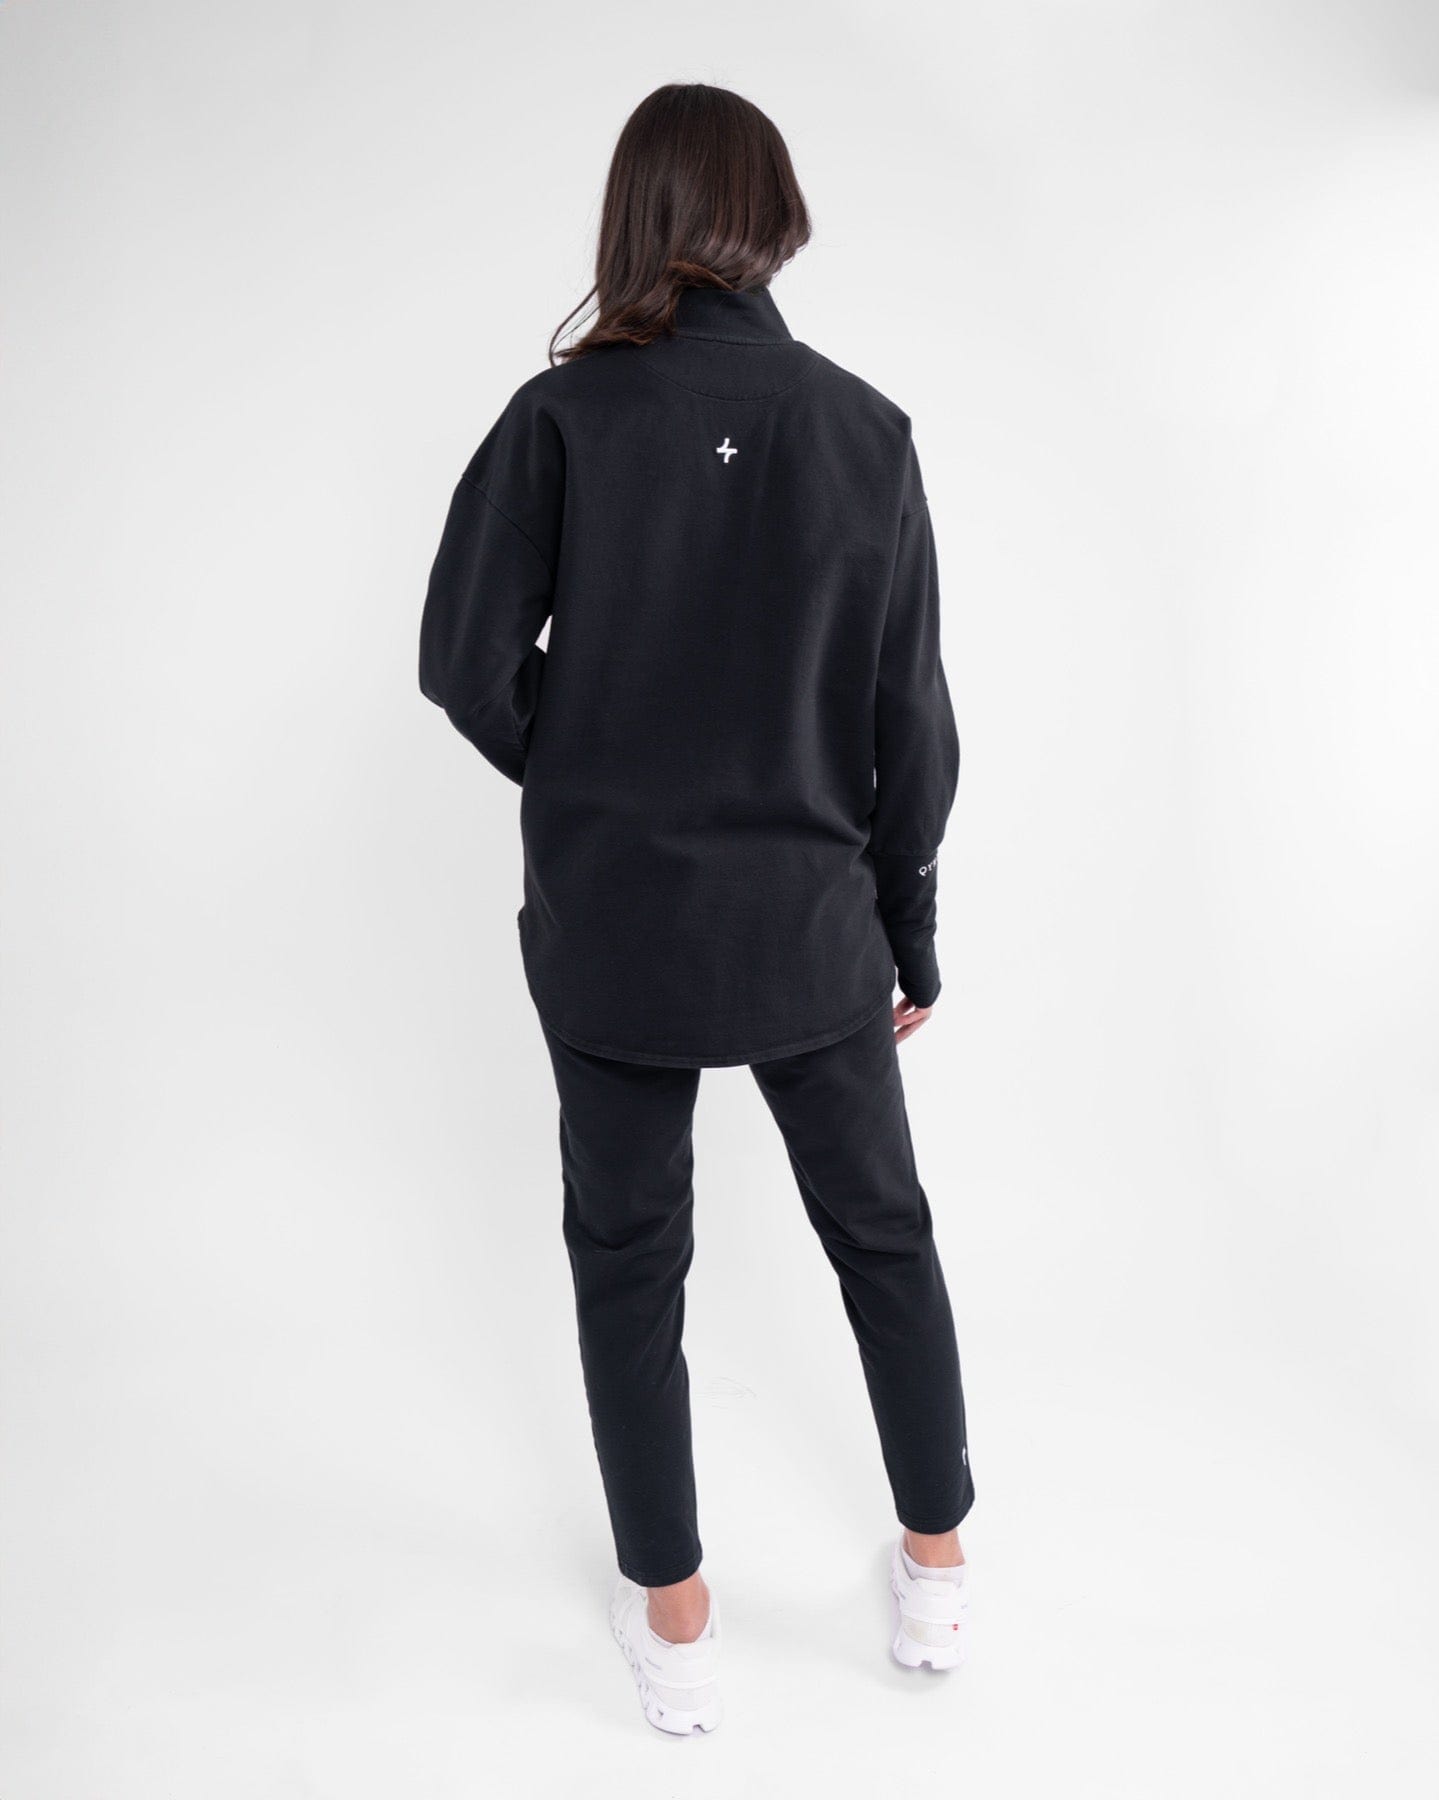 A woman stands with her back to the camera, showcasing a long-sleeve, black-colored modest athletic top paired with matching leggings, both featuring cooling fabric technology. 